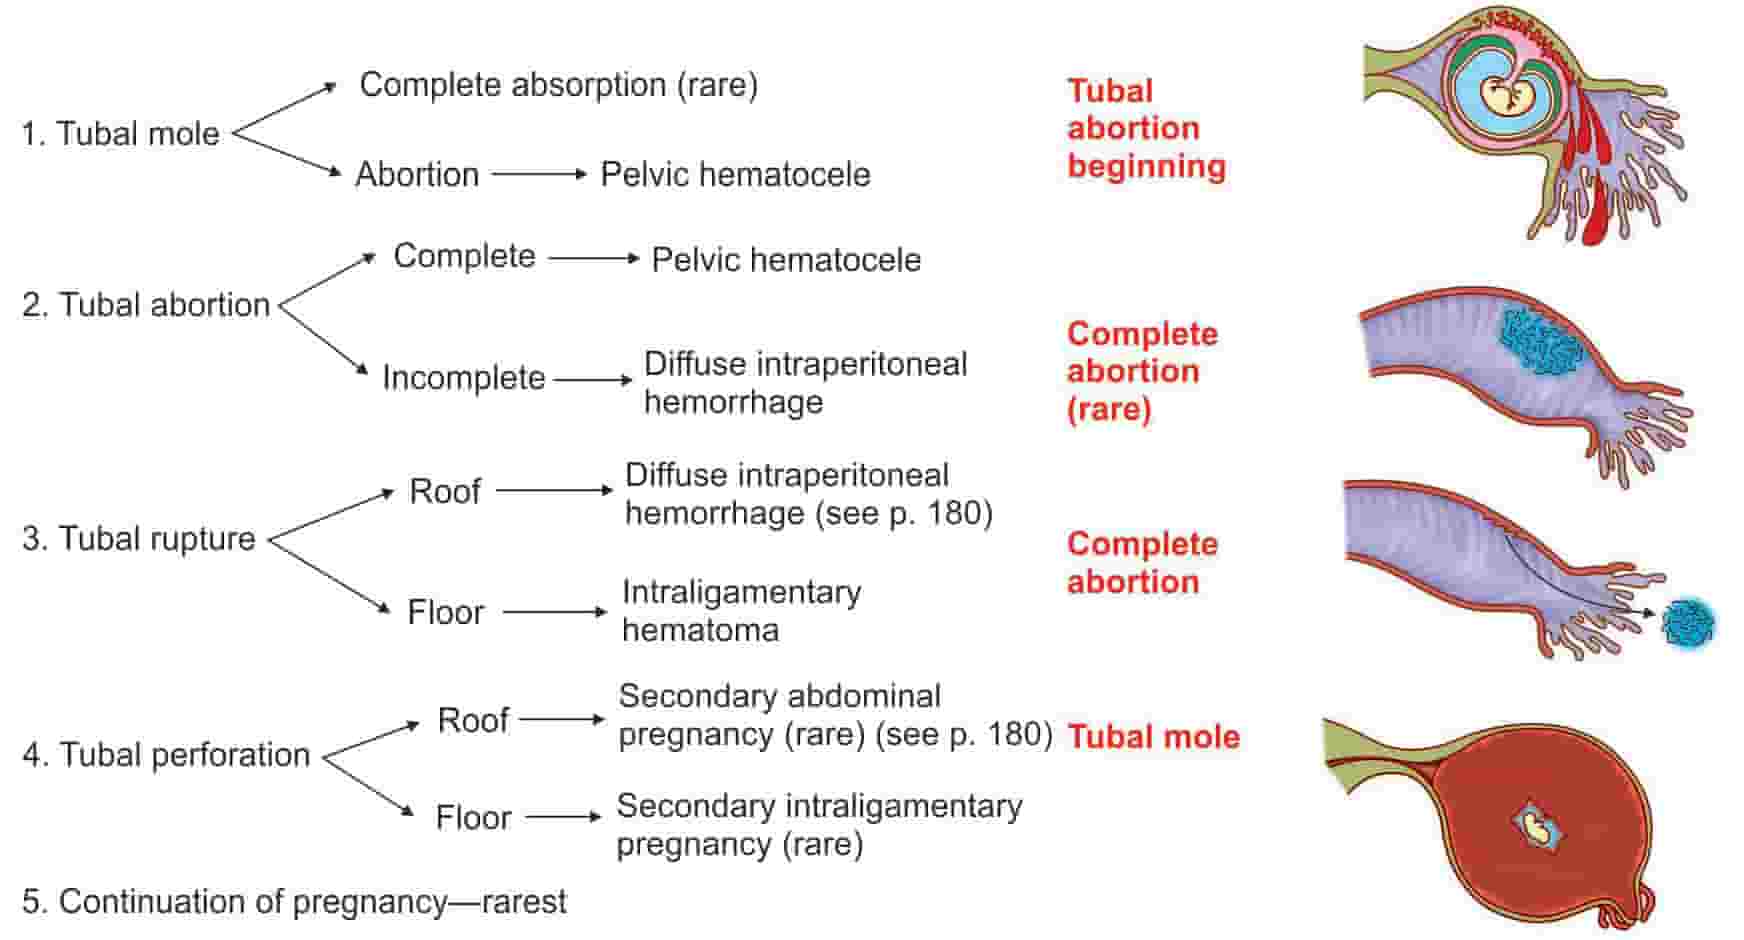 Ectopic pregnancy (Chapter 31) - Ultrasonography in Reproductive Medicine  and Infertility